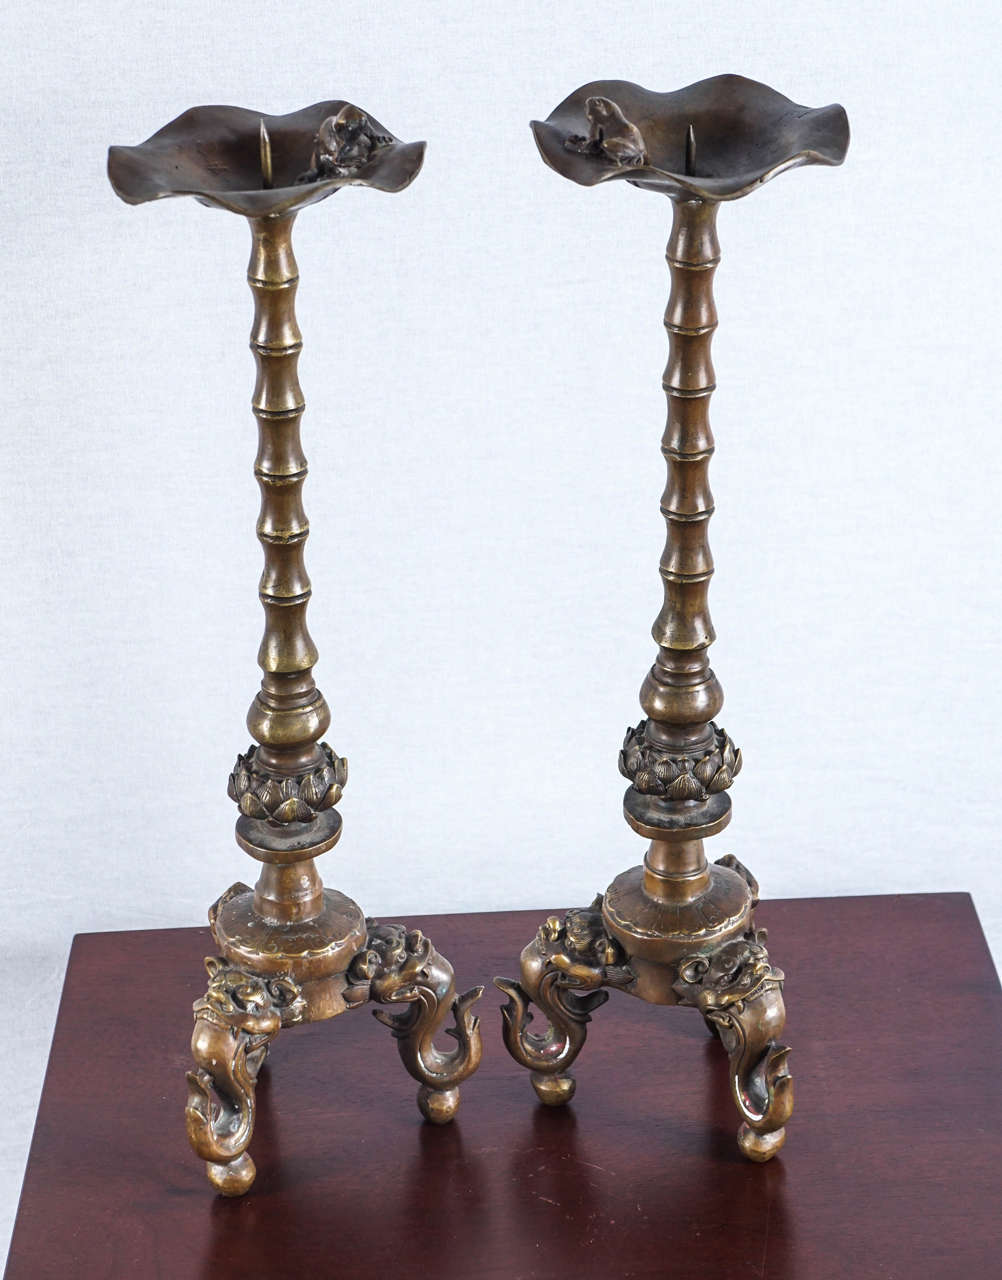 Hand-forged in Bronze, these ornate yet subtle candle-stands, sets the stage for Chinese Imperial guardians, lions, or “foo dogs”. At the top of the candle-stands, near the pricket, sits a frog on a lily pad shape. A frog, symbolizes fertility, as